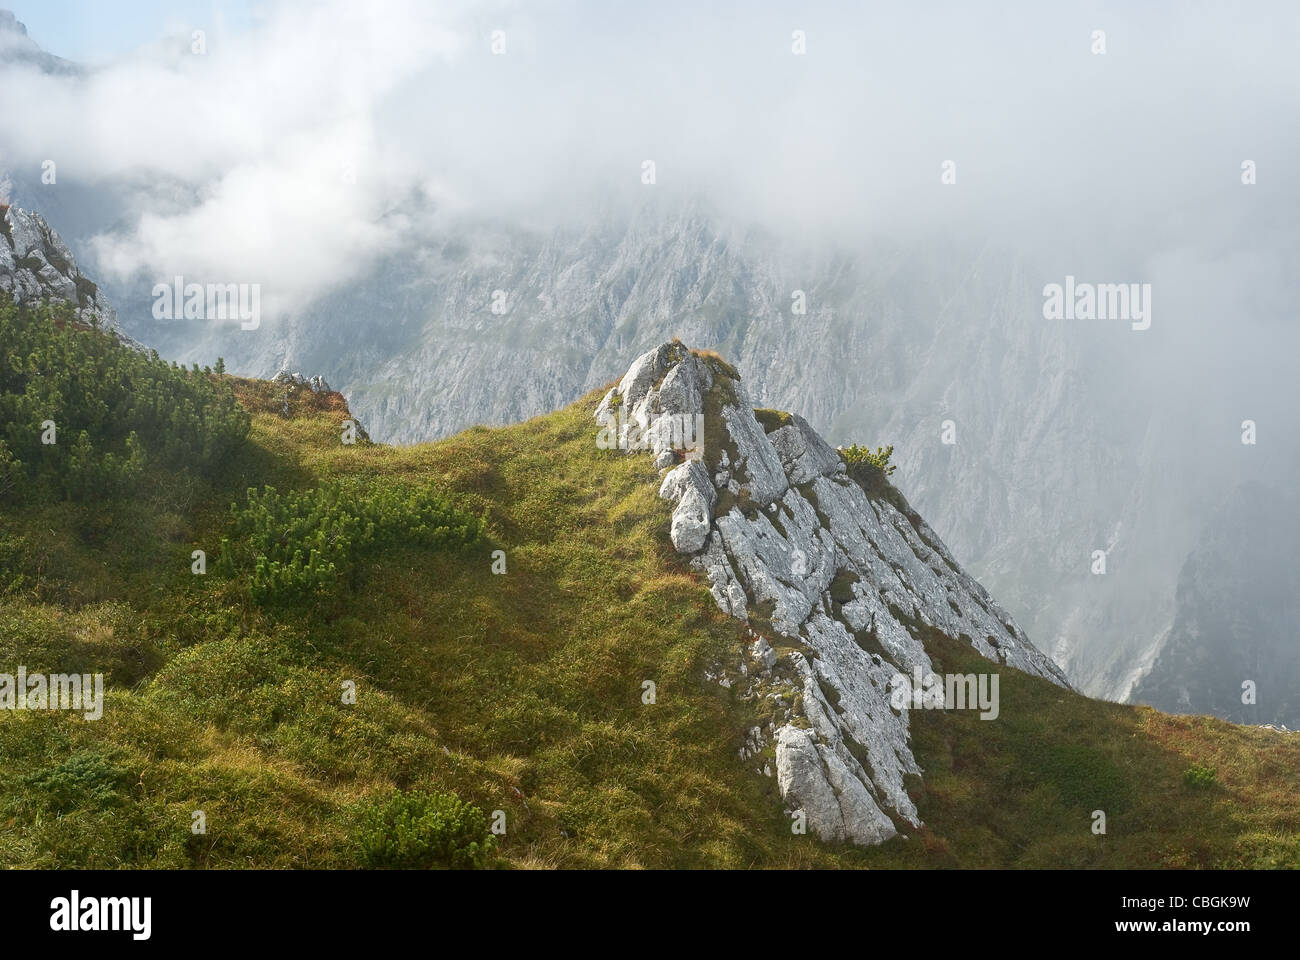 Alpine Mountain Landscape In Bavaria with Rocks and Grass Stock Photo